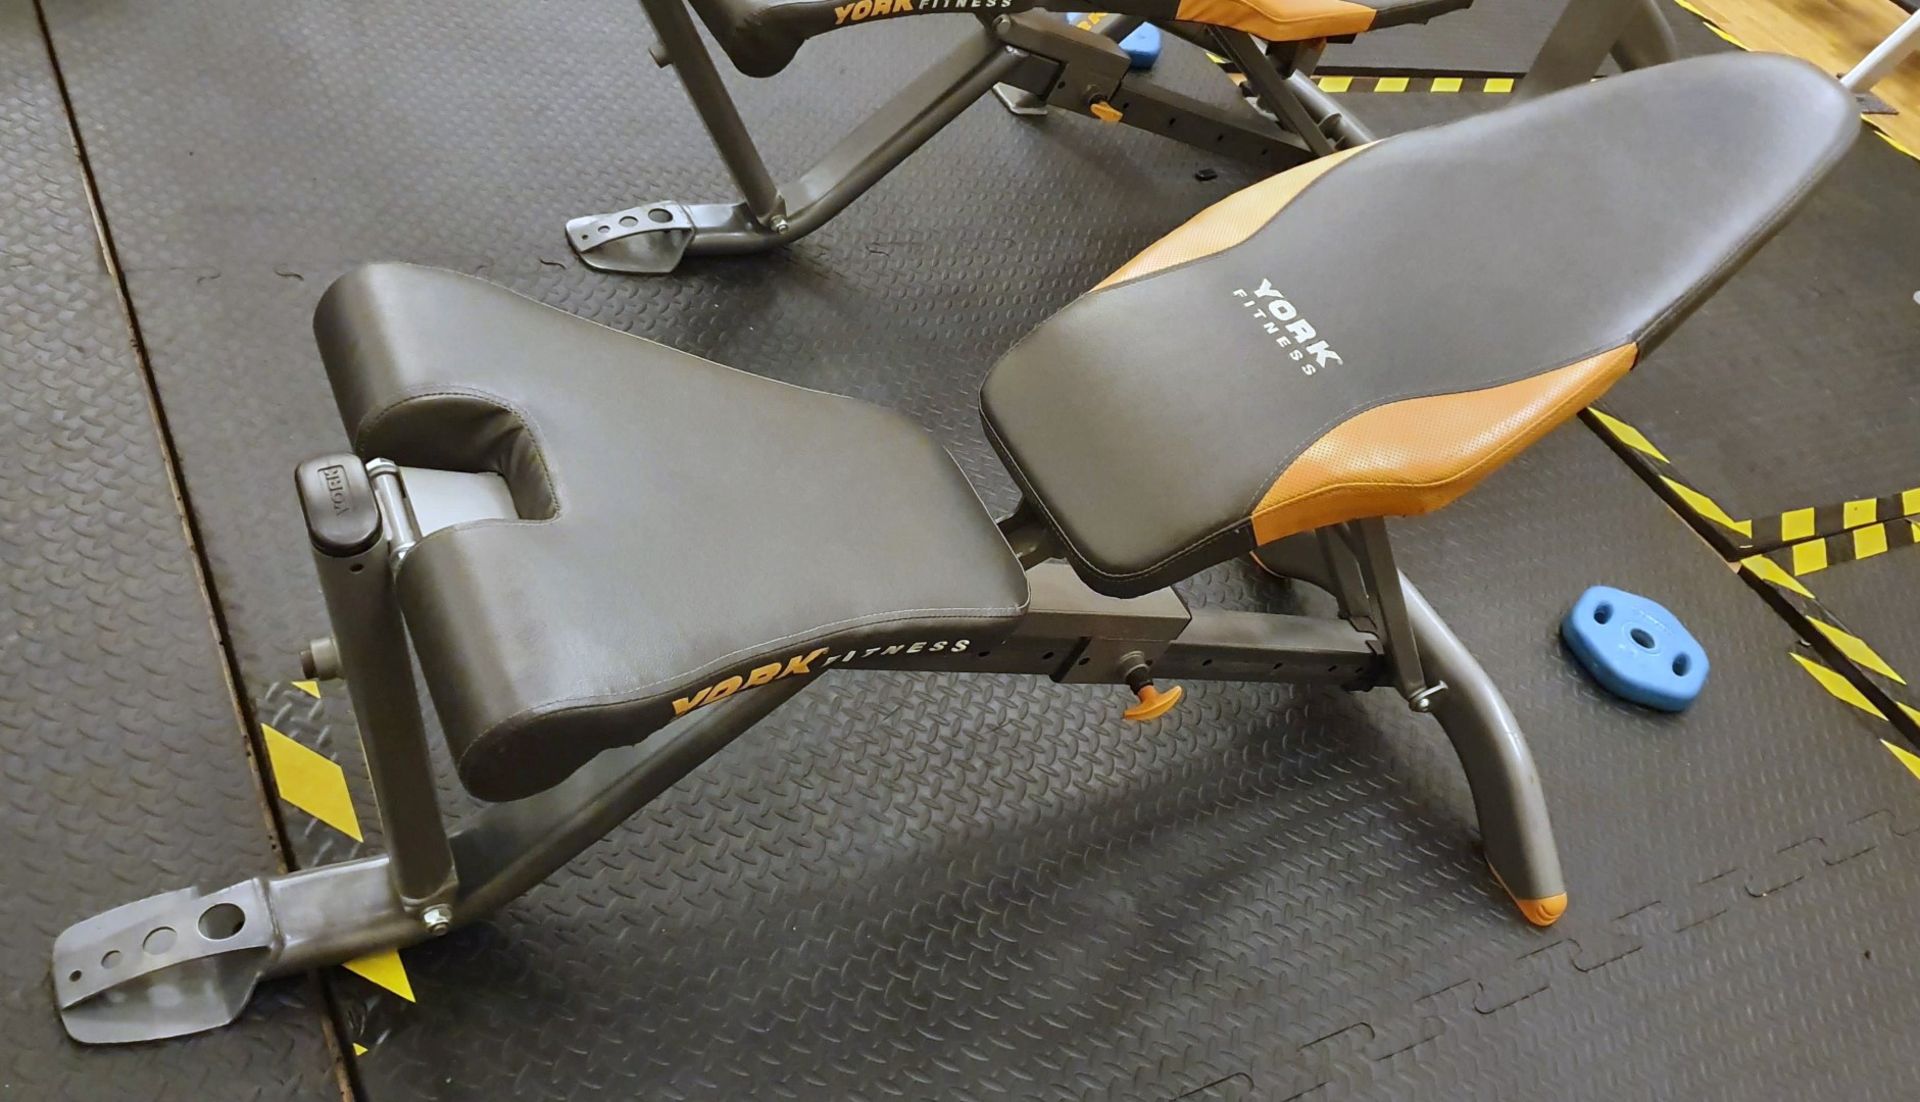 1 x York Weight Lifting Bench - CL552 - Location: West Yorkshire - Image 2 of 4